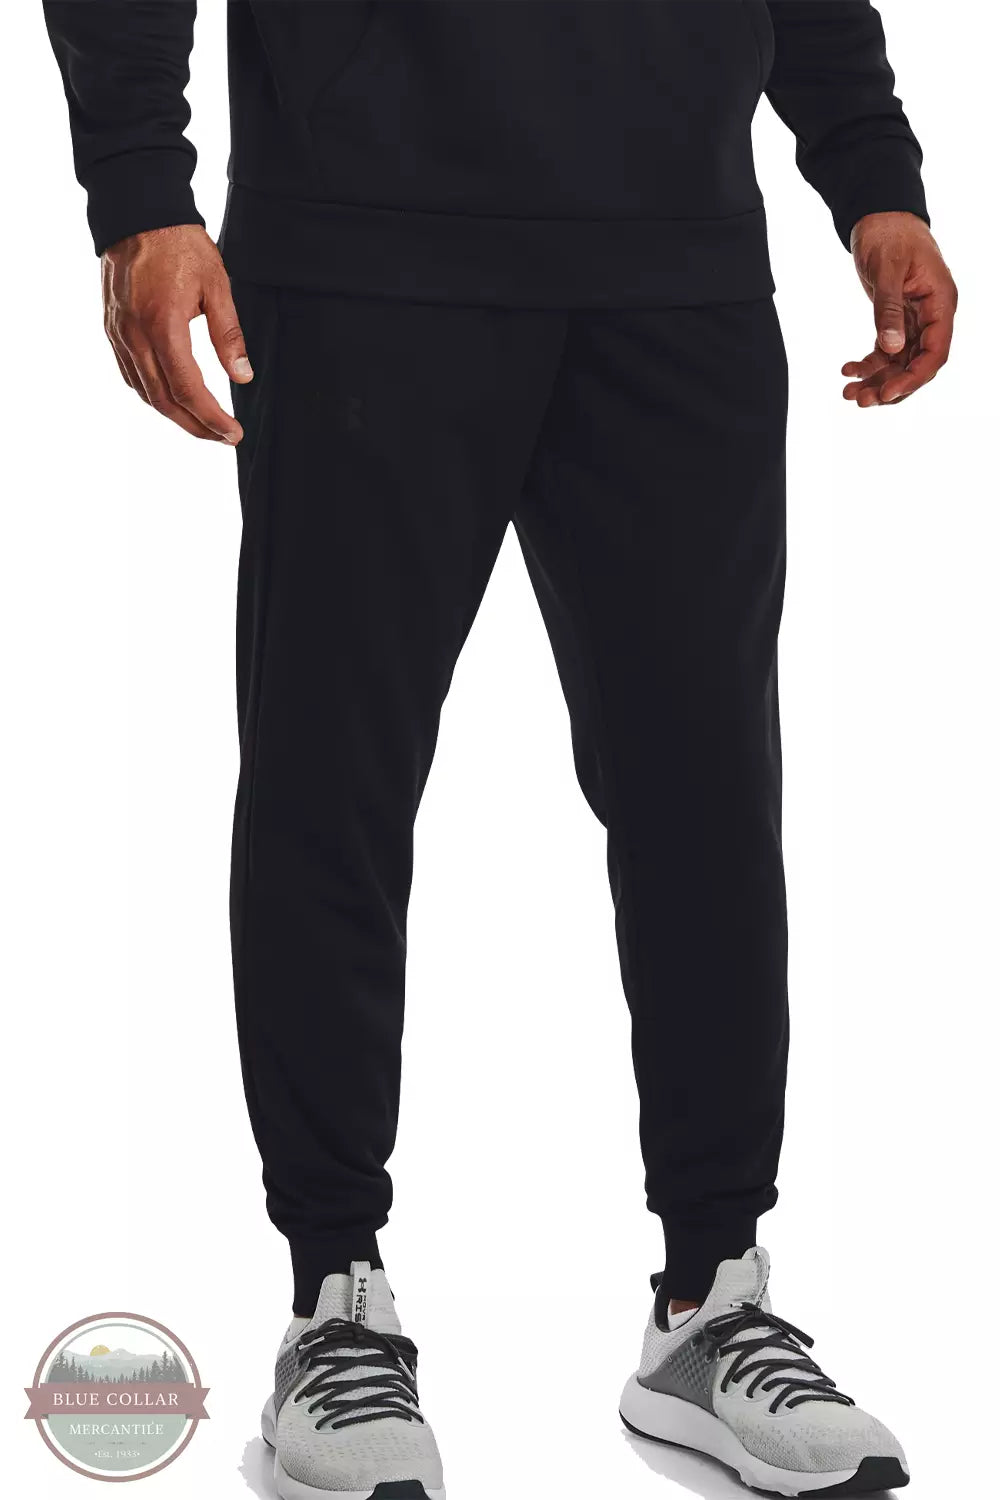 Under Armour 1373362 Armour Fleece Jogger Pants Black Front View. Available in multiple colors